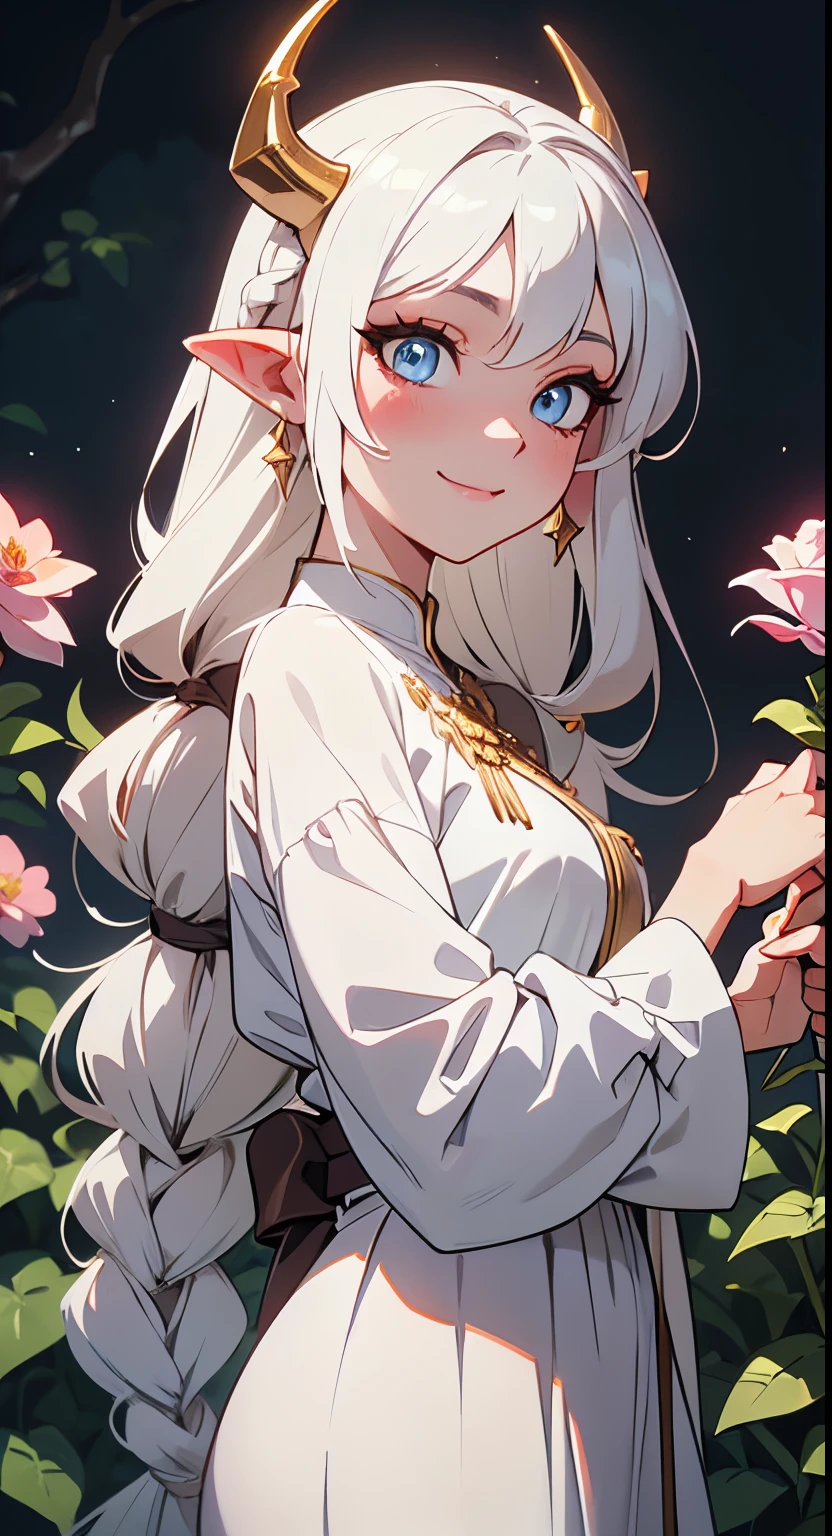 Female character, 1woman, solo, anime, beautiful, aesthetic, illustration, anime artstyle, masterpiece, best quality, detailed, ultra quality, professional artwork, digital art, beautiful goddess dress, long sleeve, white long dress, goddess, entity, white clothes whit golden details, mystic girl, pure face, white lashes, glowing eyes, beautiful eyes, pale skin, white roses around her, legend, long dress, white olympus outfit, olympus, paradise, irresistible, gorgeous, pure art, official art, 4k, gorgeous goddess clothes, hd, anime art, illustration anime digital art, digital, professional artist, white hair, braid in the back, cute big long braid hair, light blue eyes, so pretty, warm smile, happy expression, shaman, blush, lovely, basic art, 2d anime artstyle, long golden horns, blindy eyes, close up, pointy ears, 90s style, toonify, scenario, situational, scene, anime scene, episode, looking flowers, garden full of flowers, obsessed with flowers, happy, genuinely smiling, outside, fantasy scenario garden background, doing something